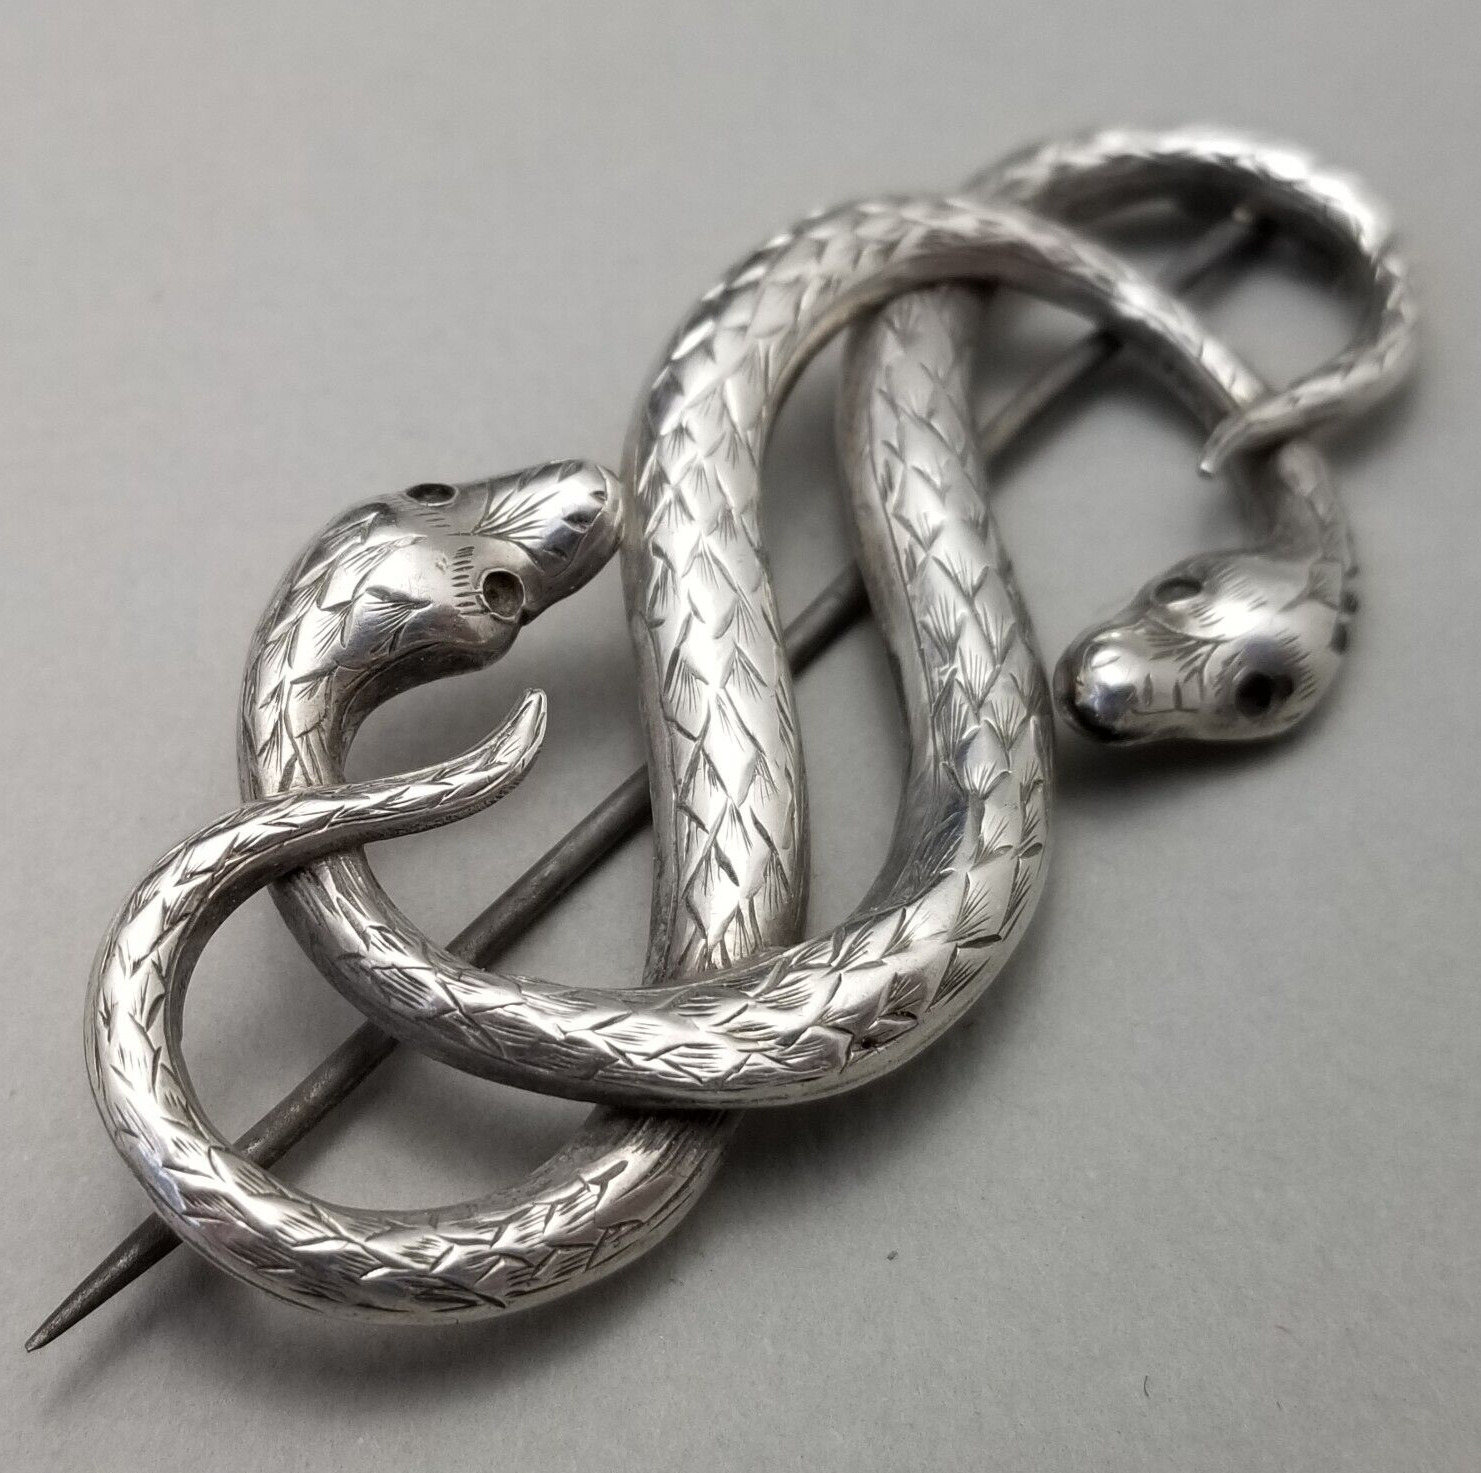 Antique Victorian Solid Sterling Silver Entwined Snakes Brooch - 10g